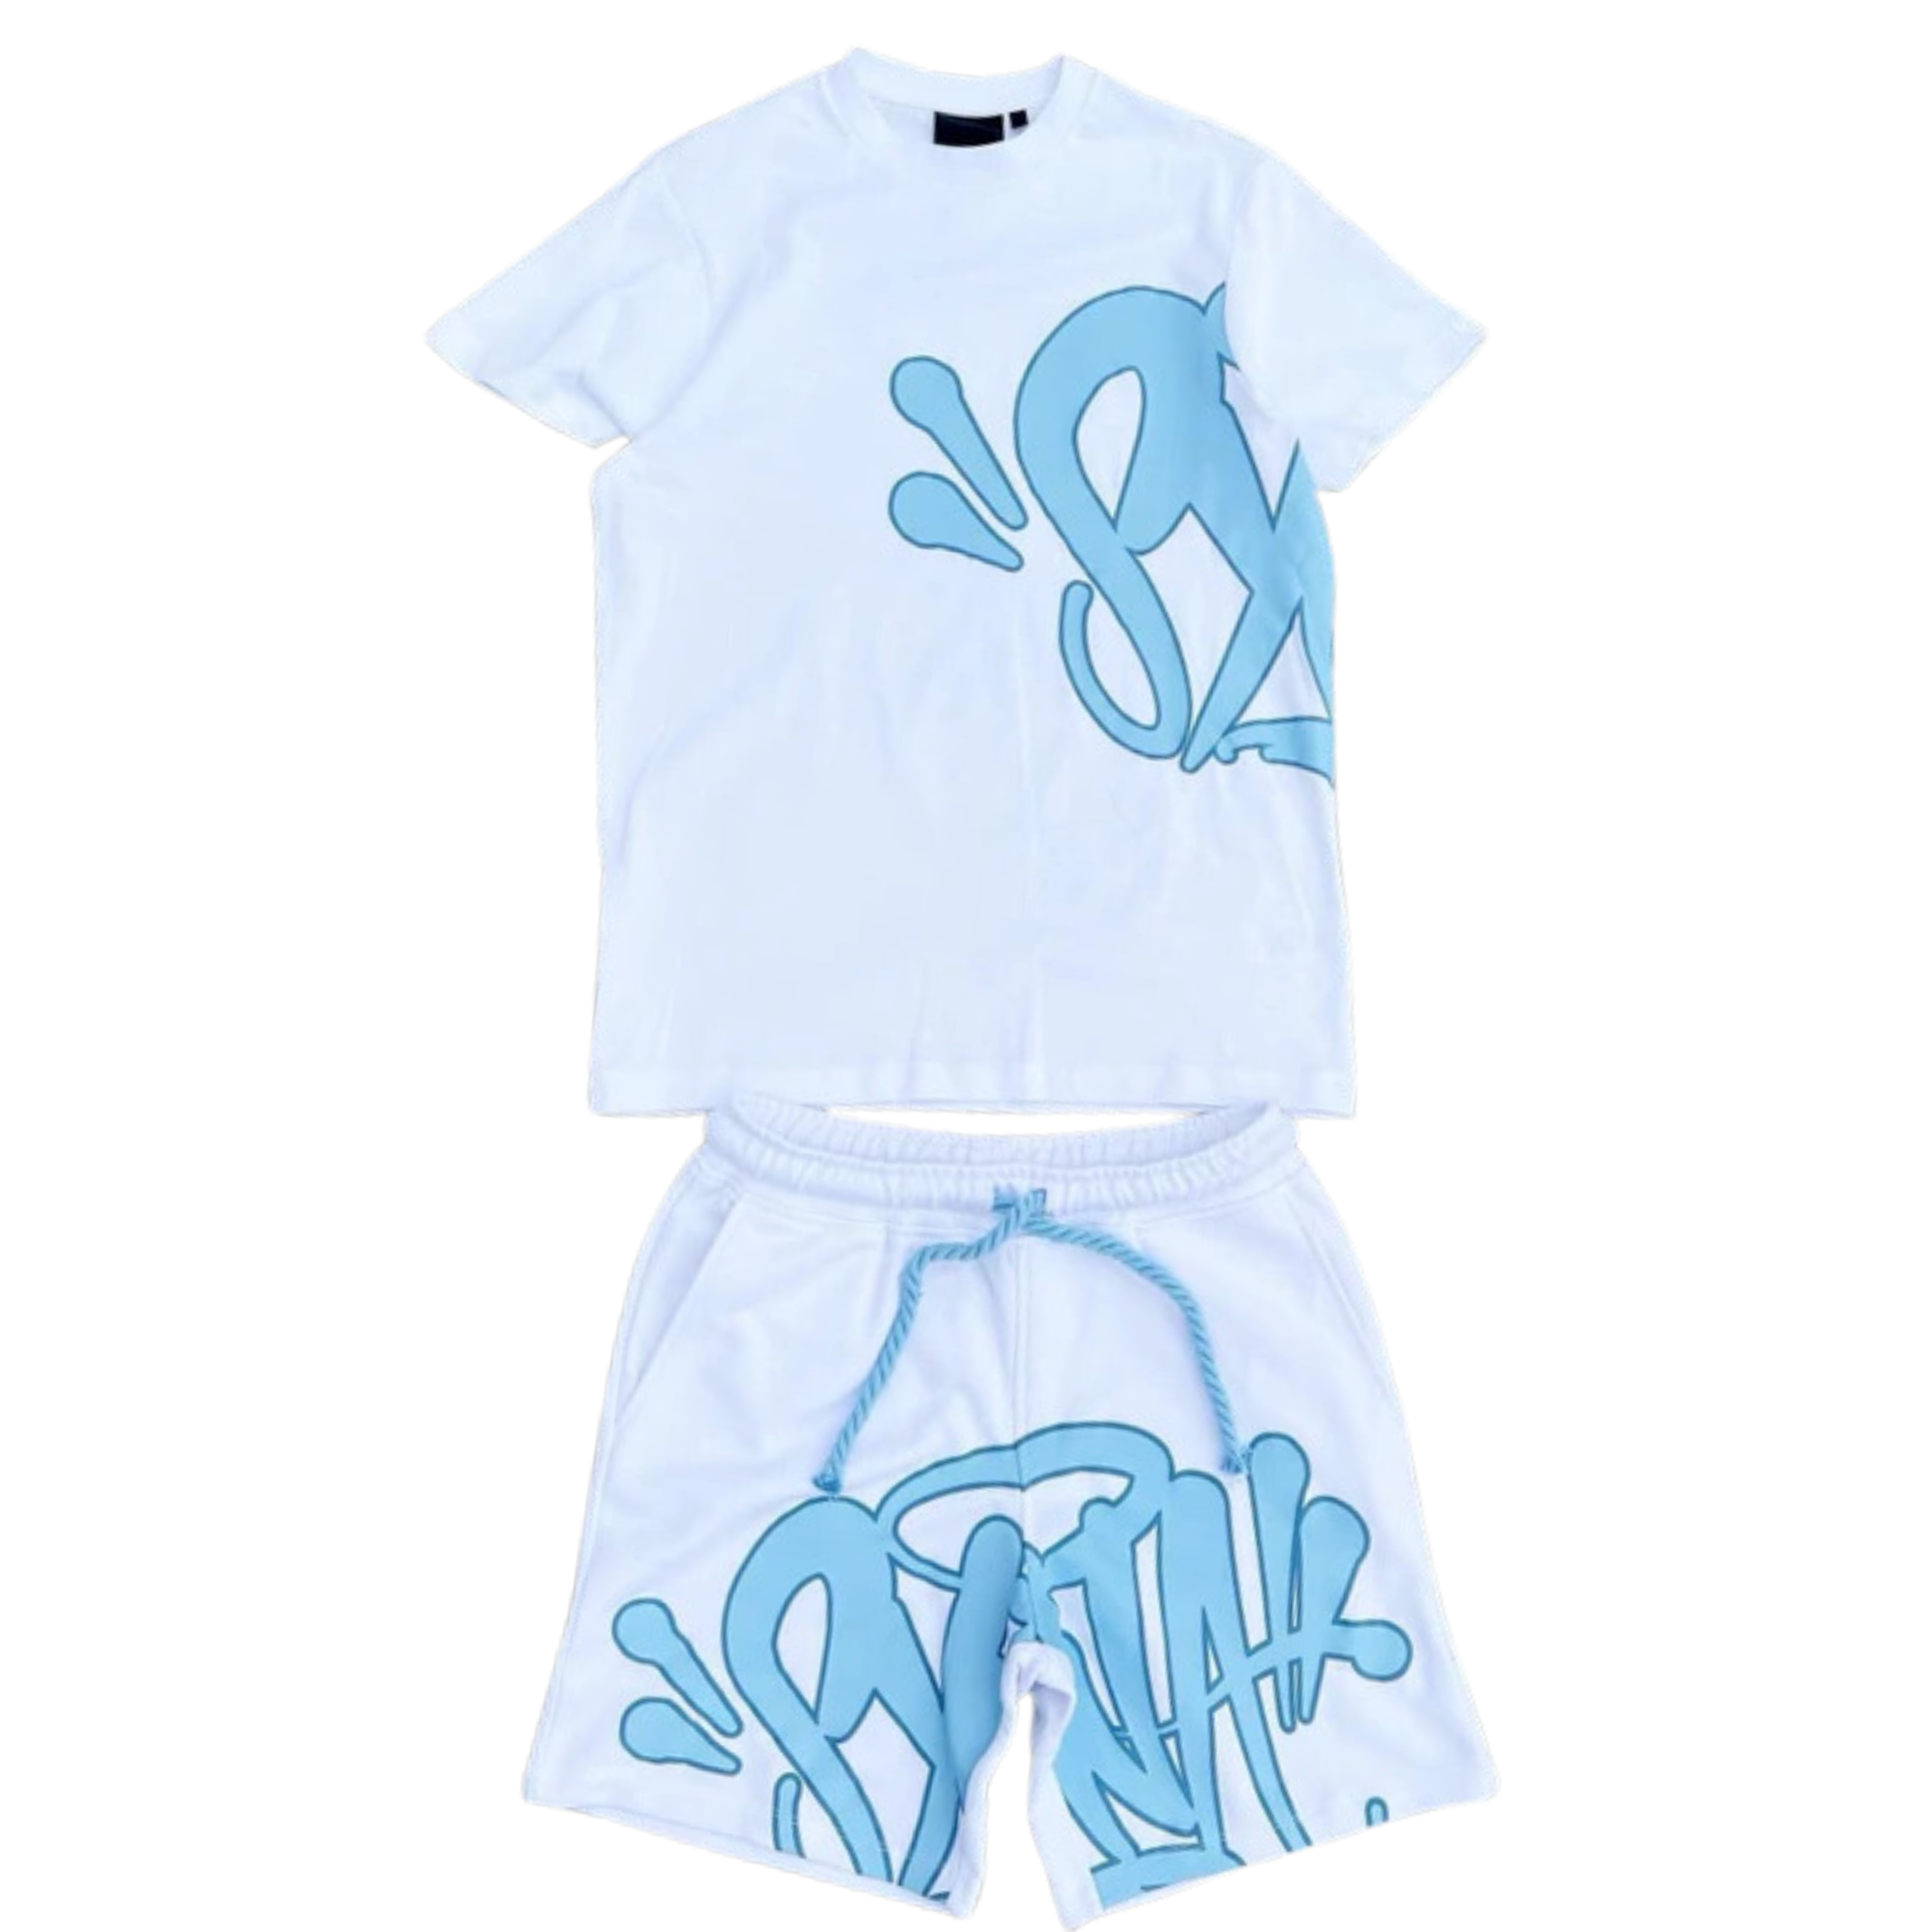 Syna Light Baby Blue Twinset (Australian Exclusive)